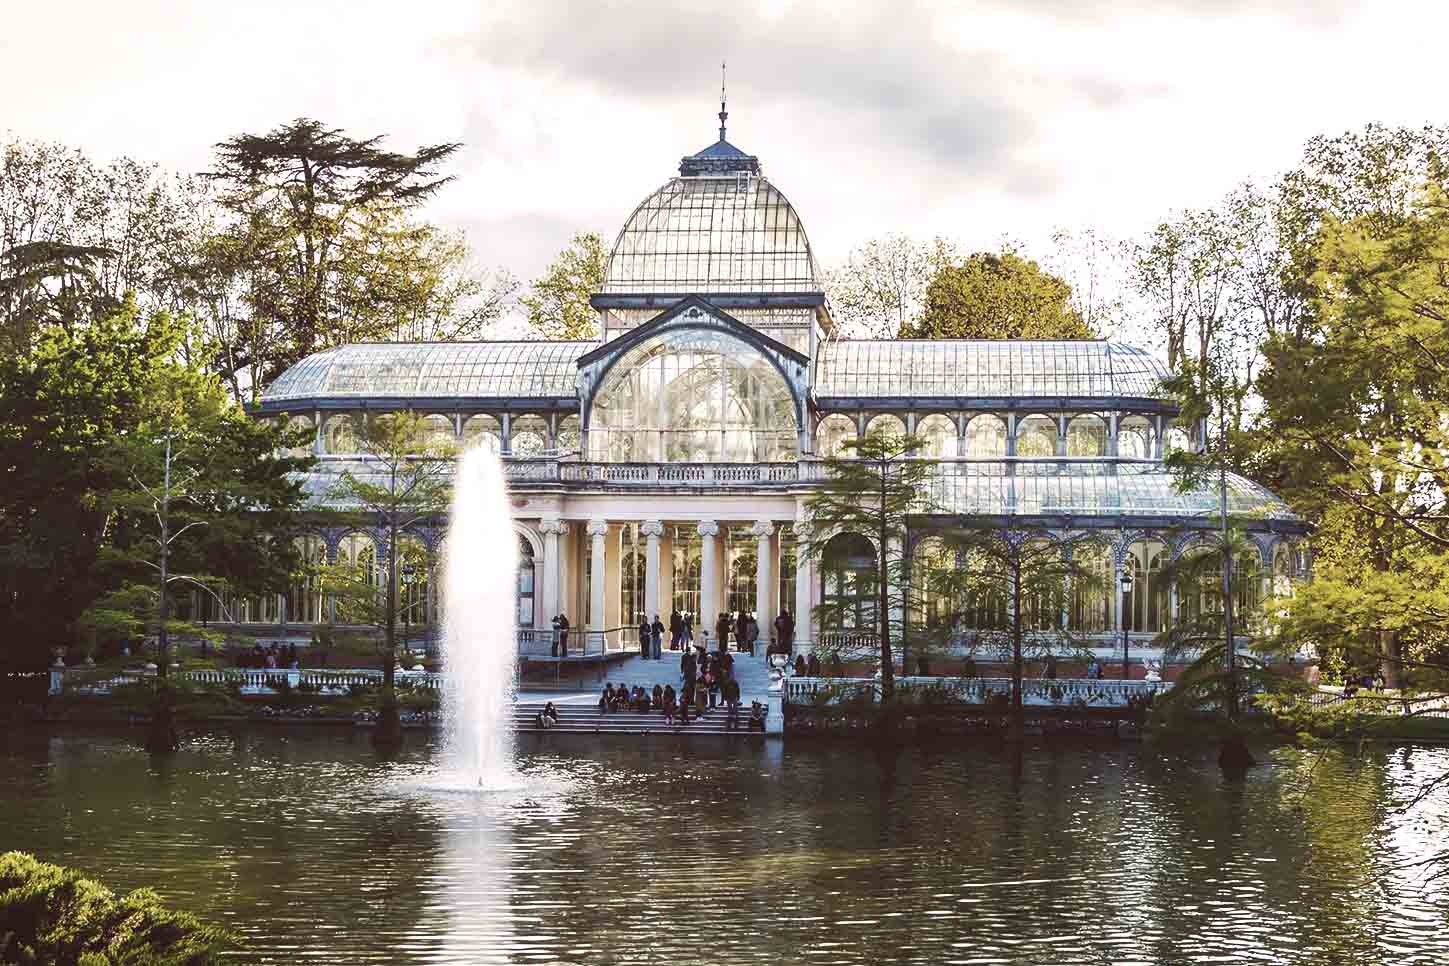 Break up your football weekend in Madrid with a stroll in the Parque del Retiro